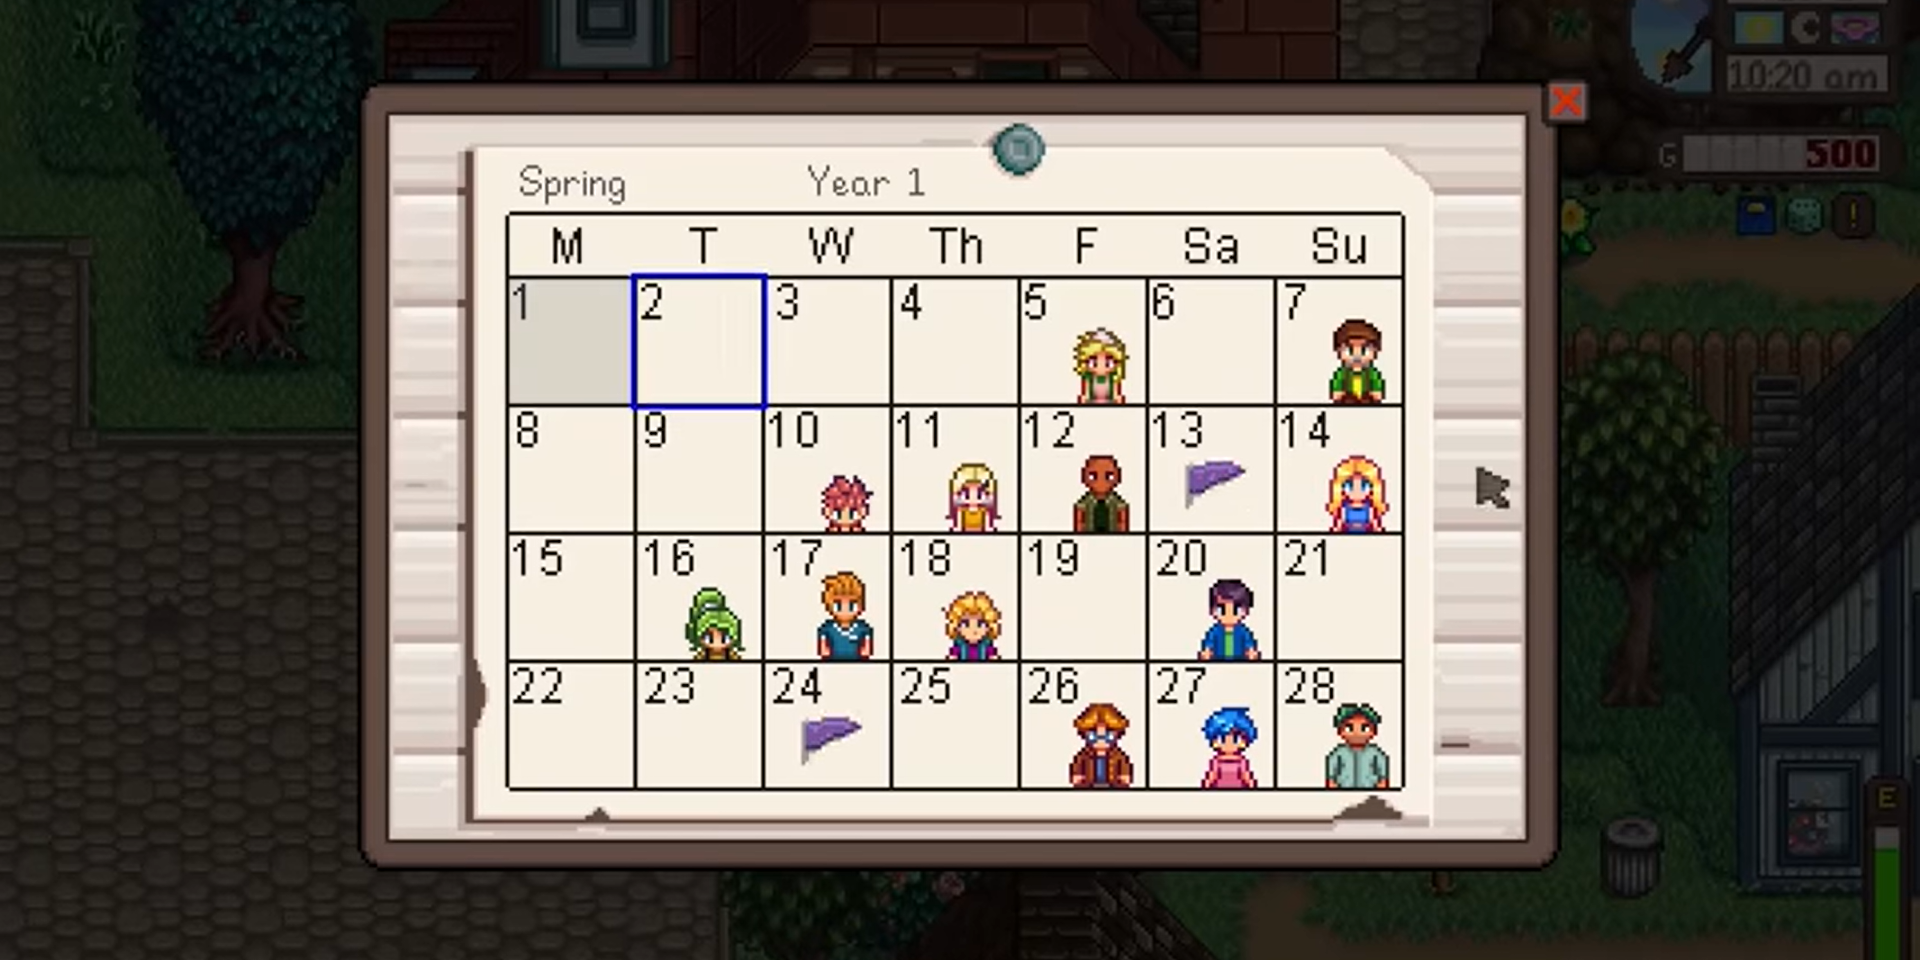 The Stardew Valley Calender, showing birthdays of the Pelican Town and Ridgeside Village residents.